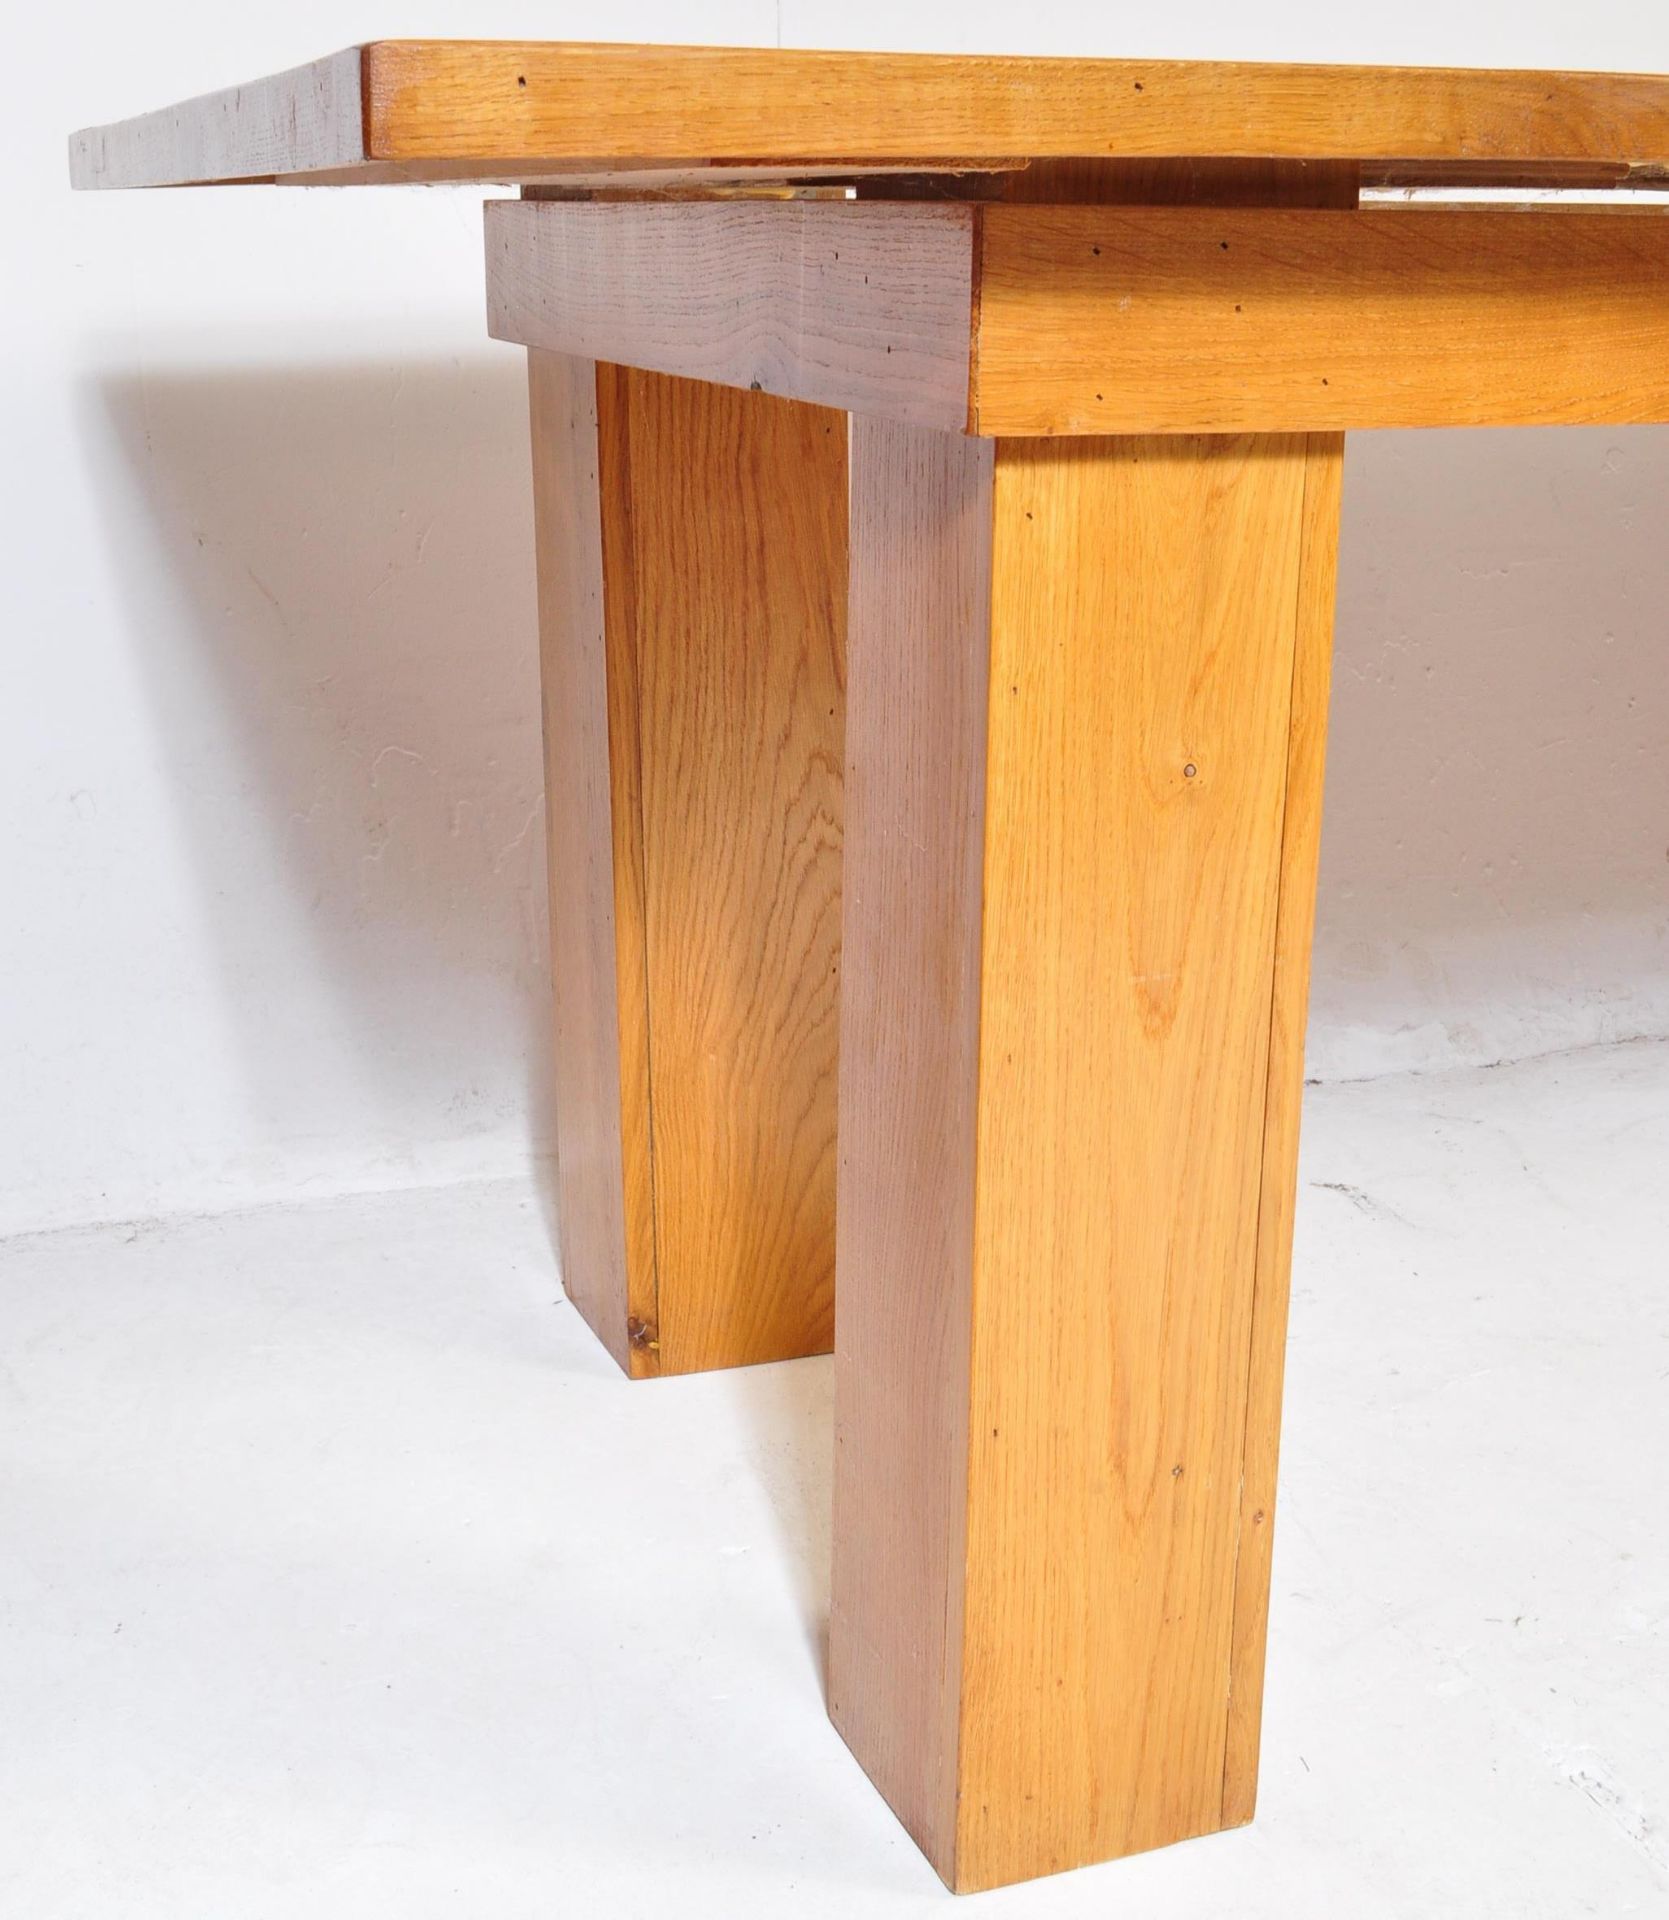 LARGE CONTEMPORARY MODERNIST OAK REFECTORY DINING TABLE - Image 4 of 4